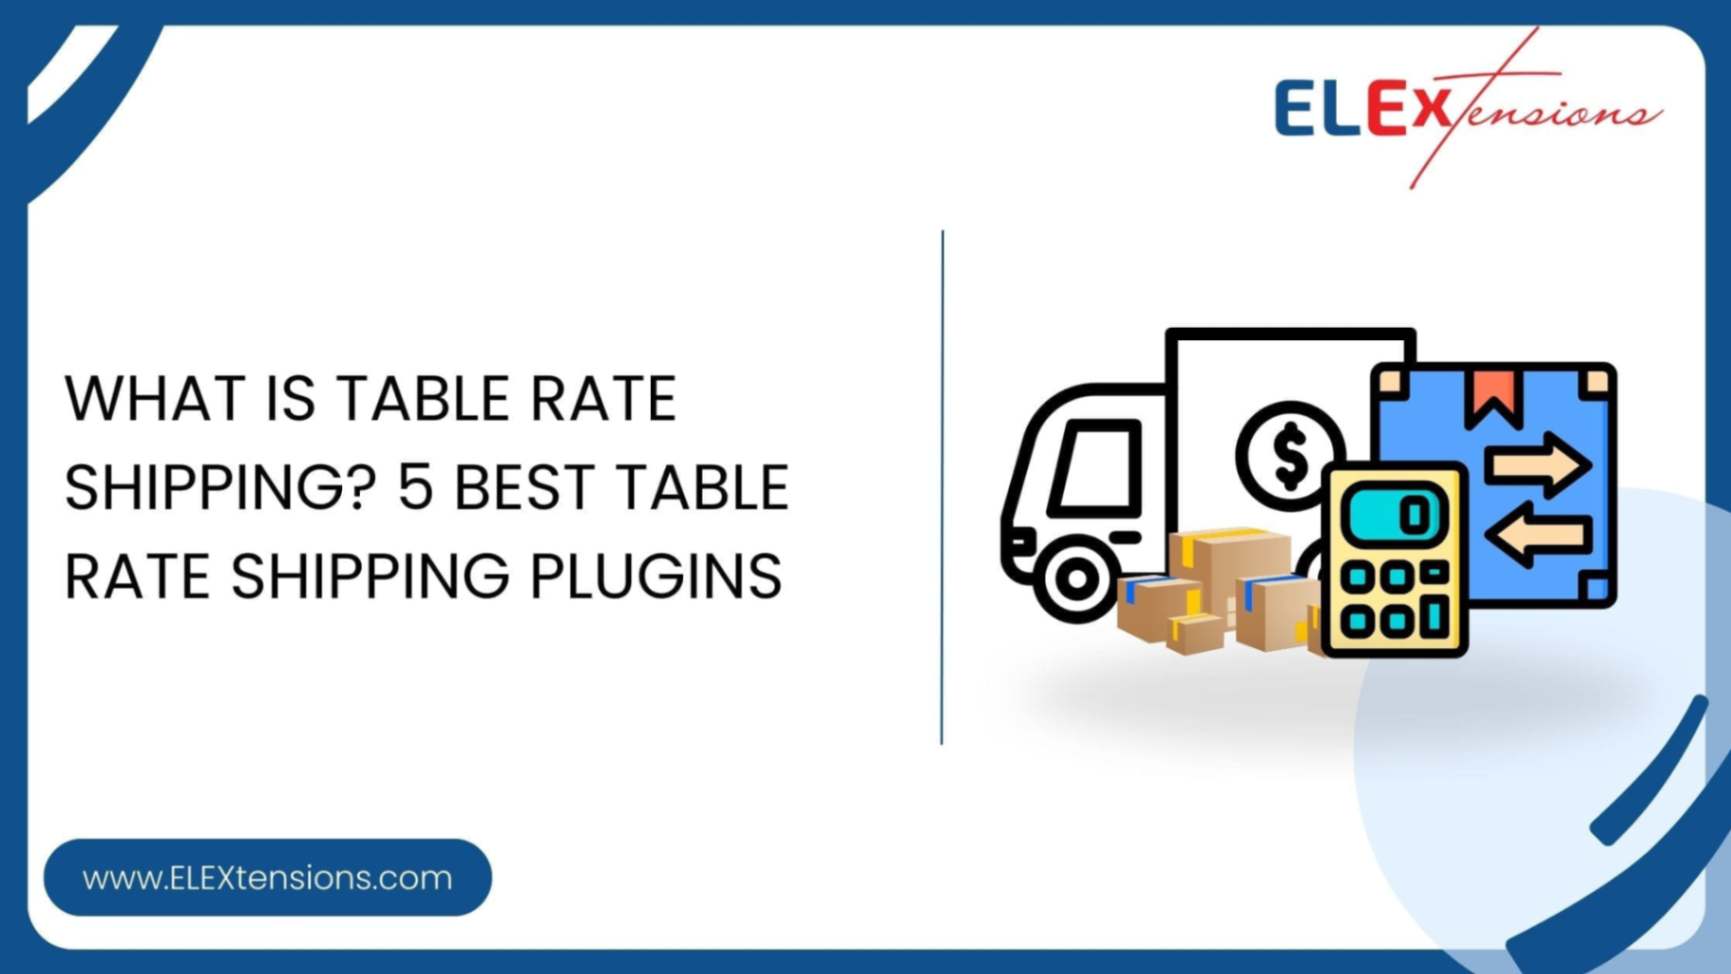 What is Table Rate Shipping? 5 Best Table Rate Shipping Plugins